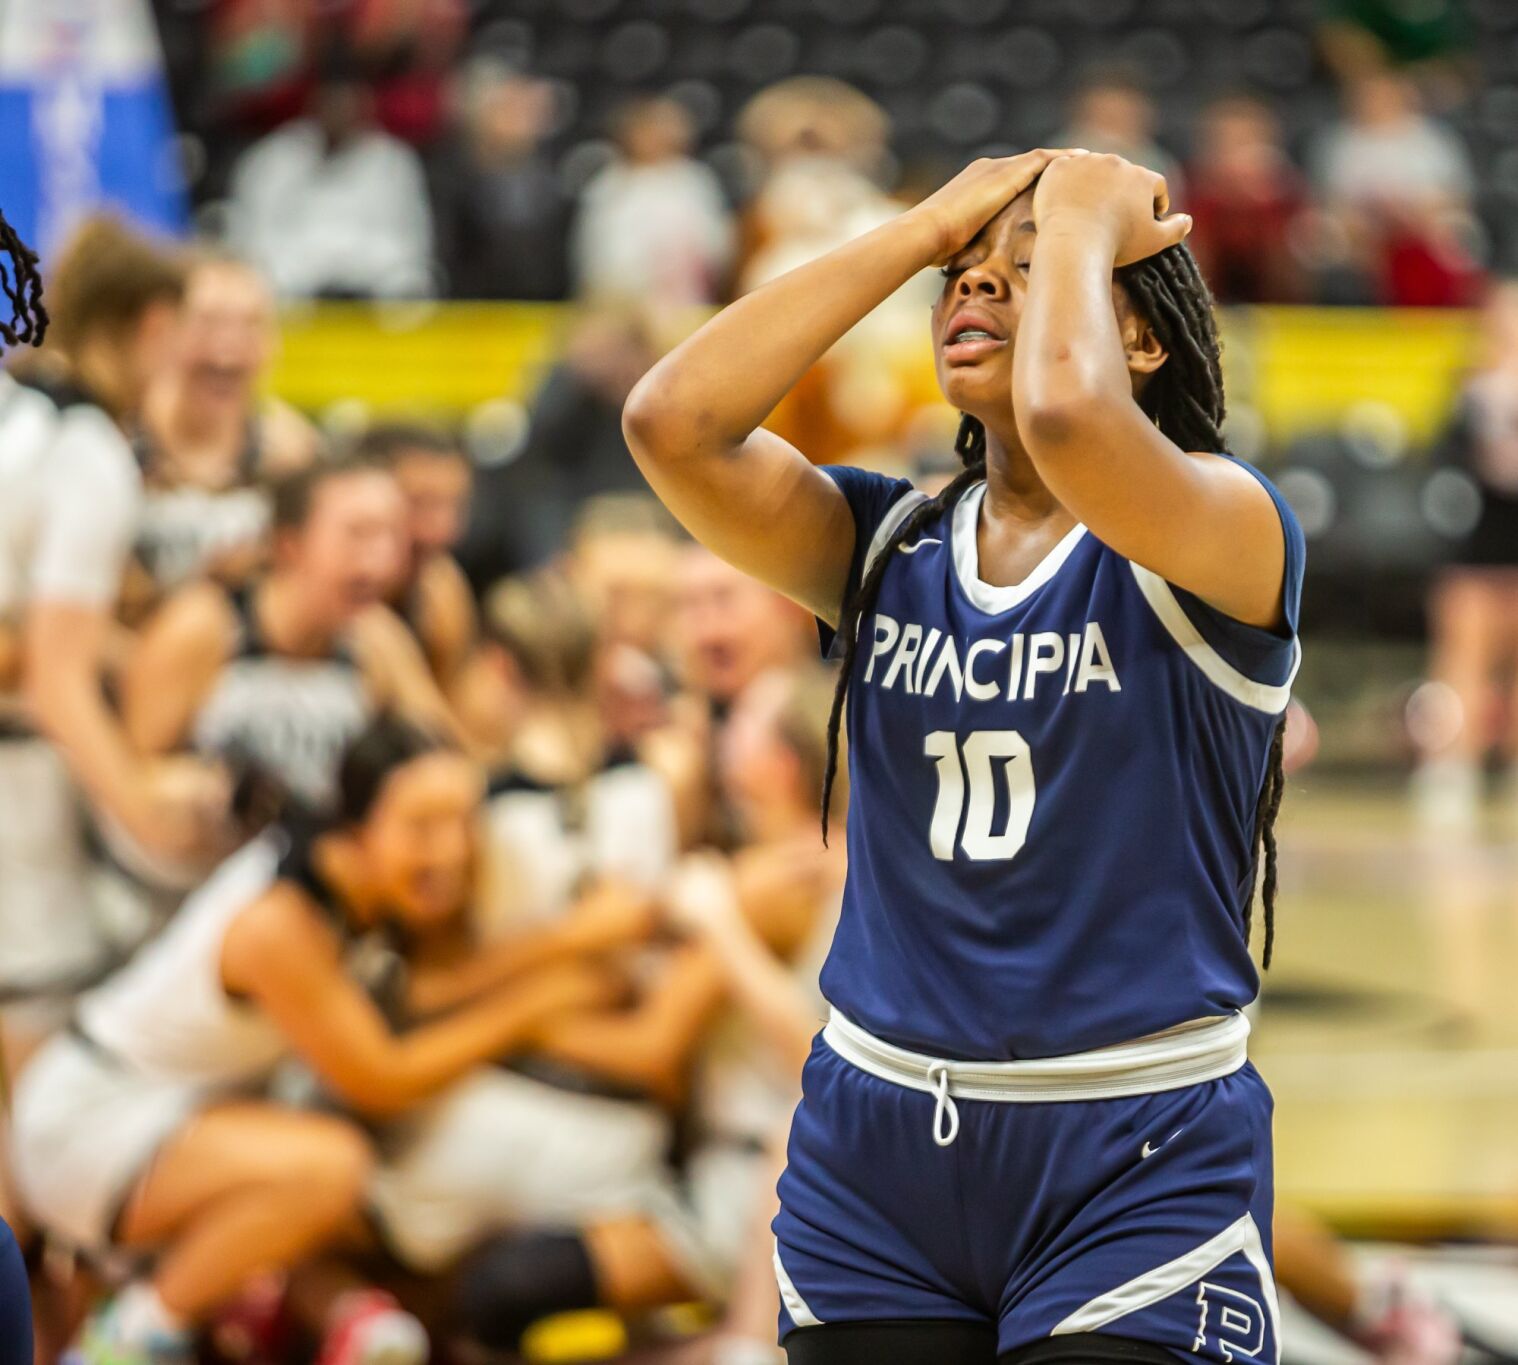 Skyline defeats Principia in Class 2 state championship with standout performances